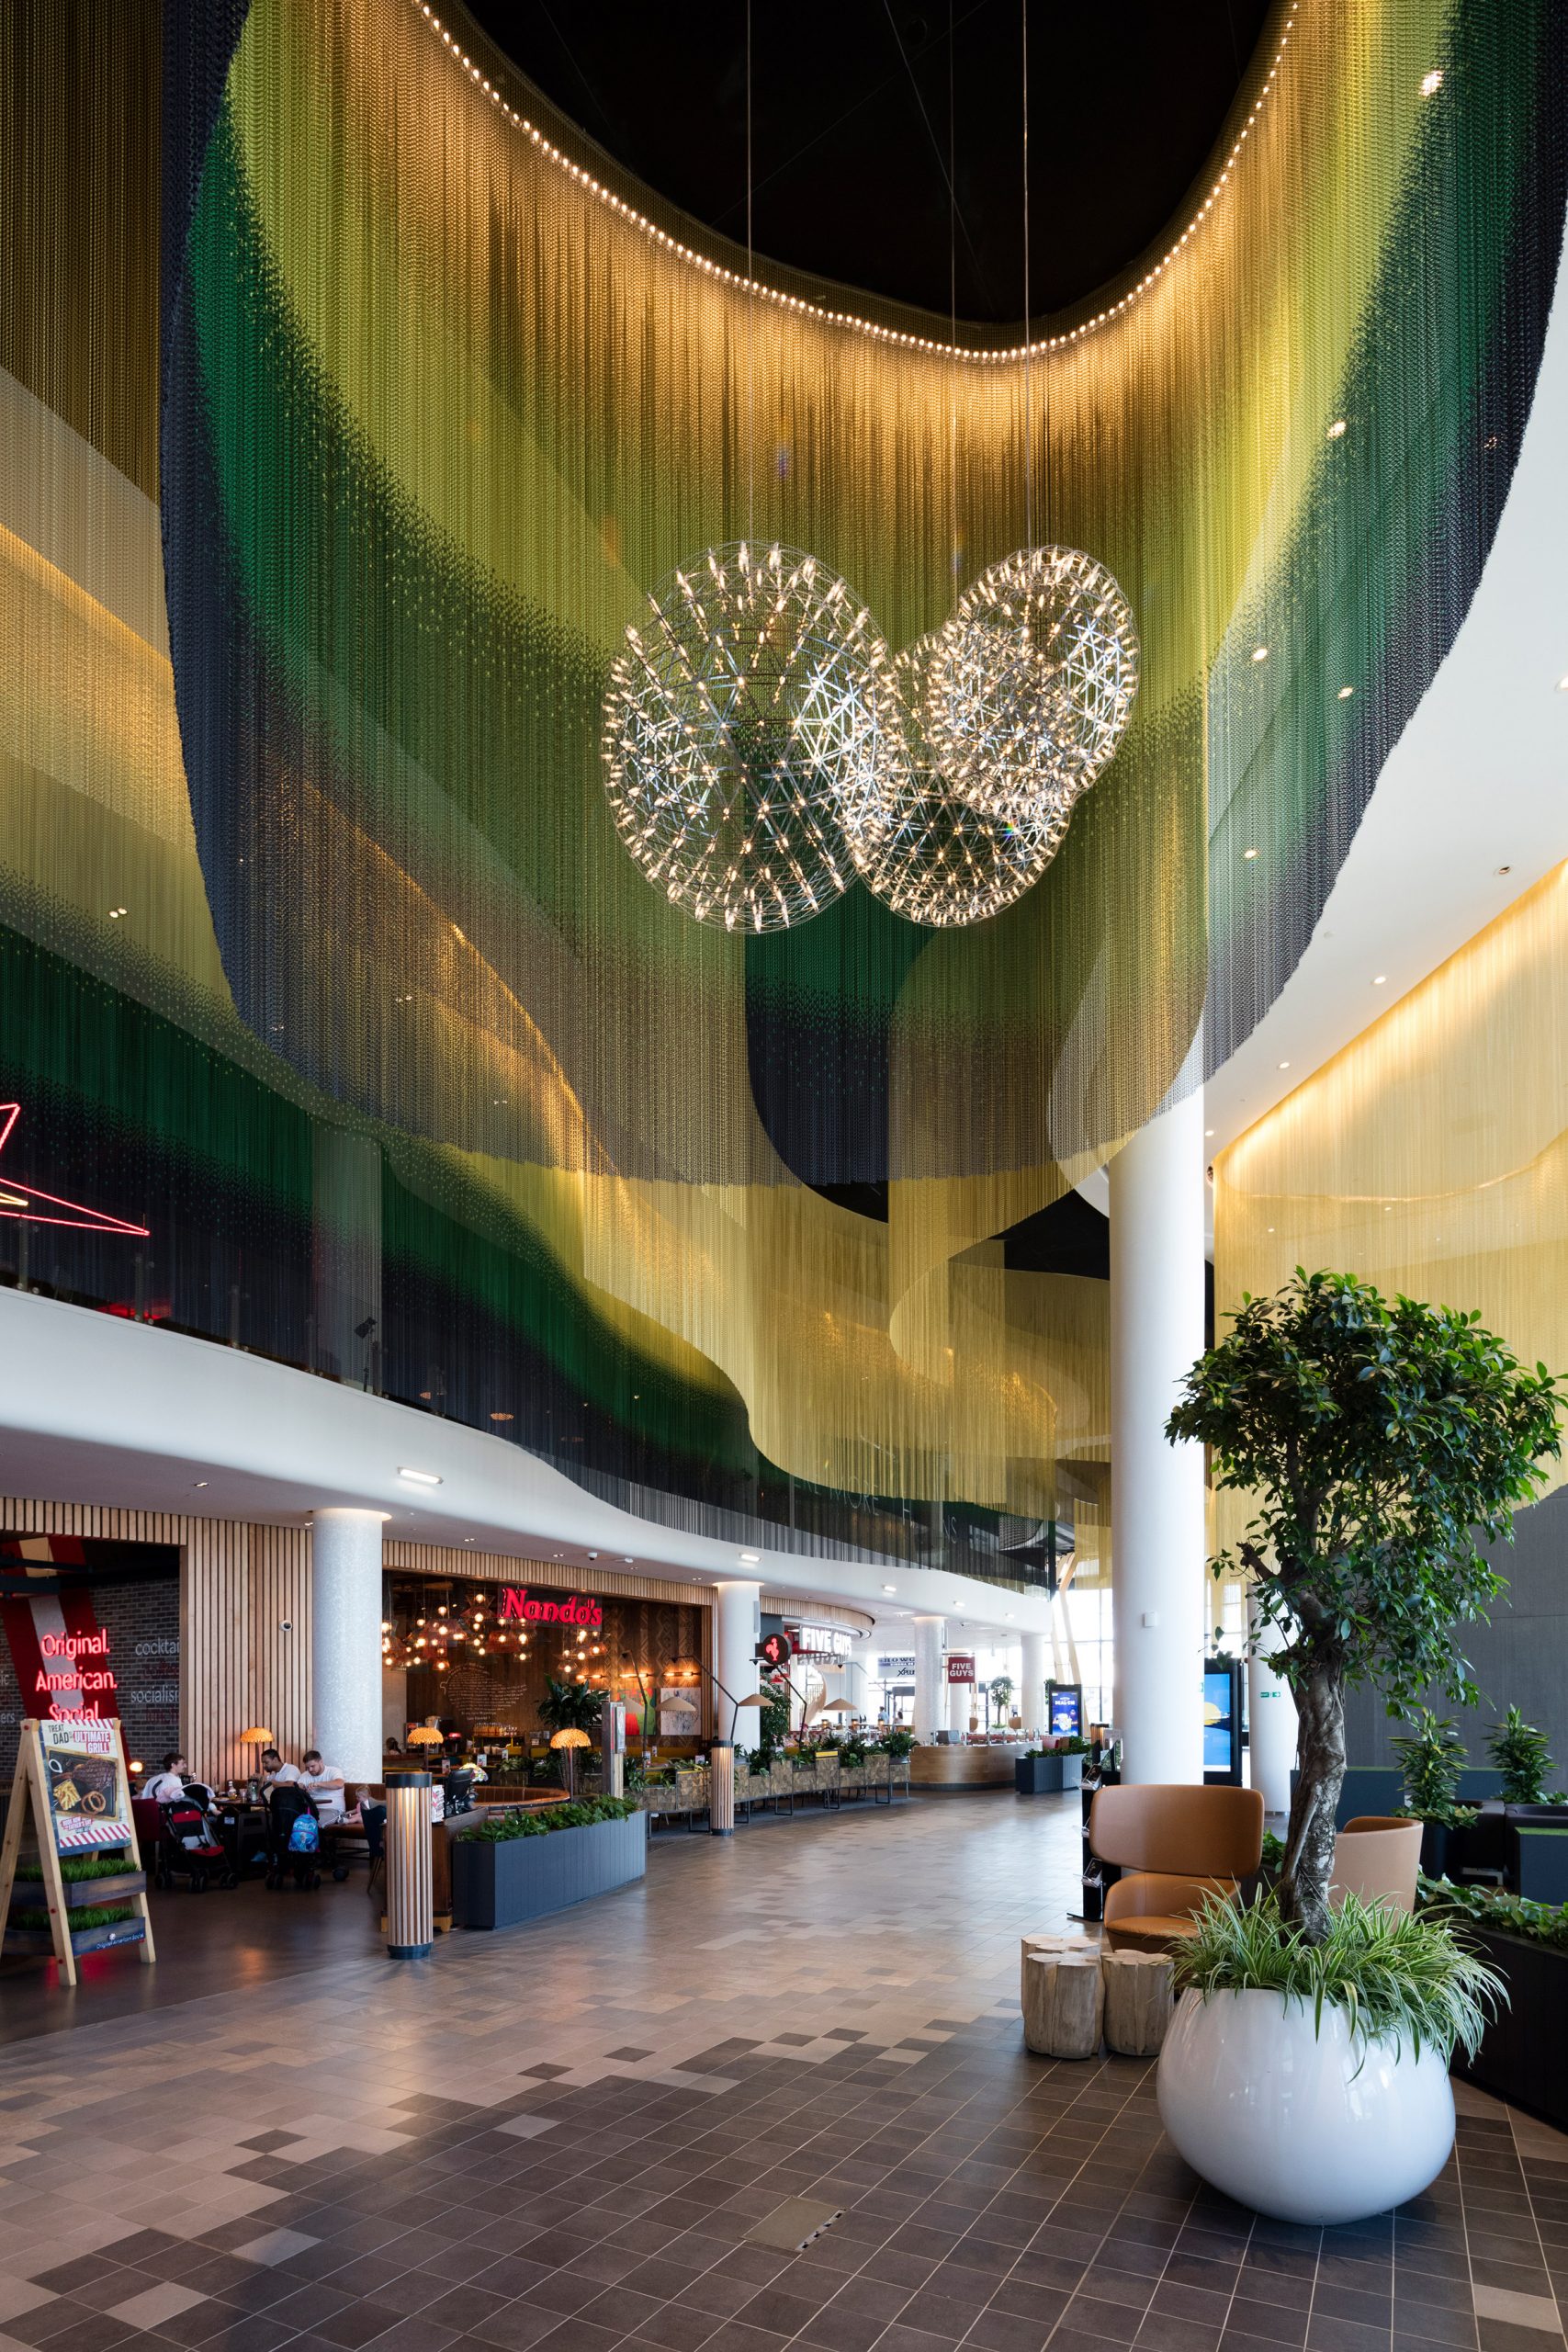 Chain-link ceiling solutions by Kriskadecor